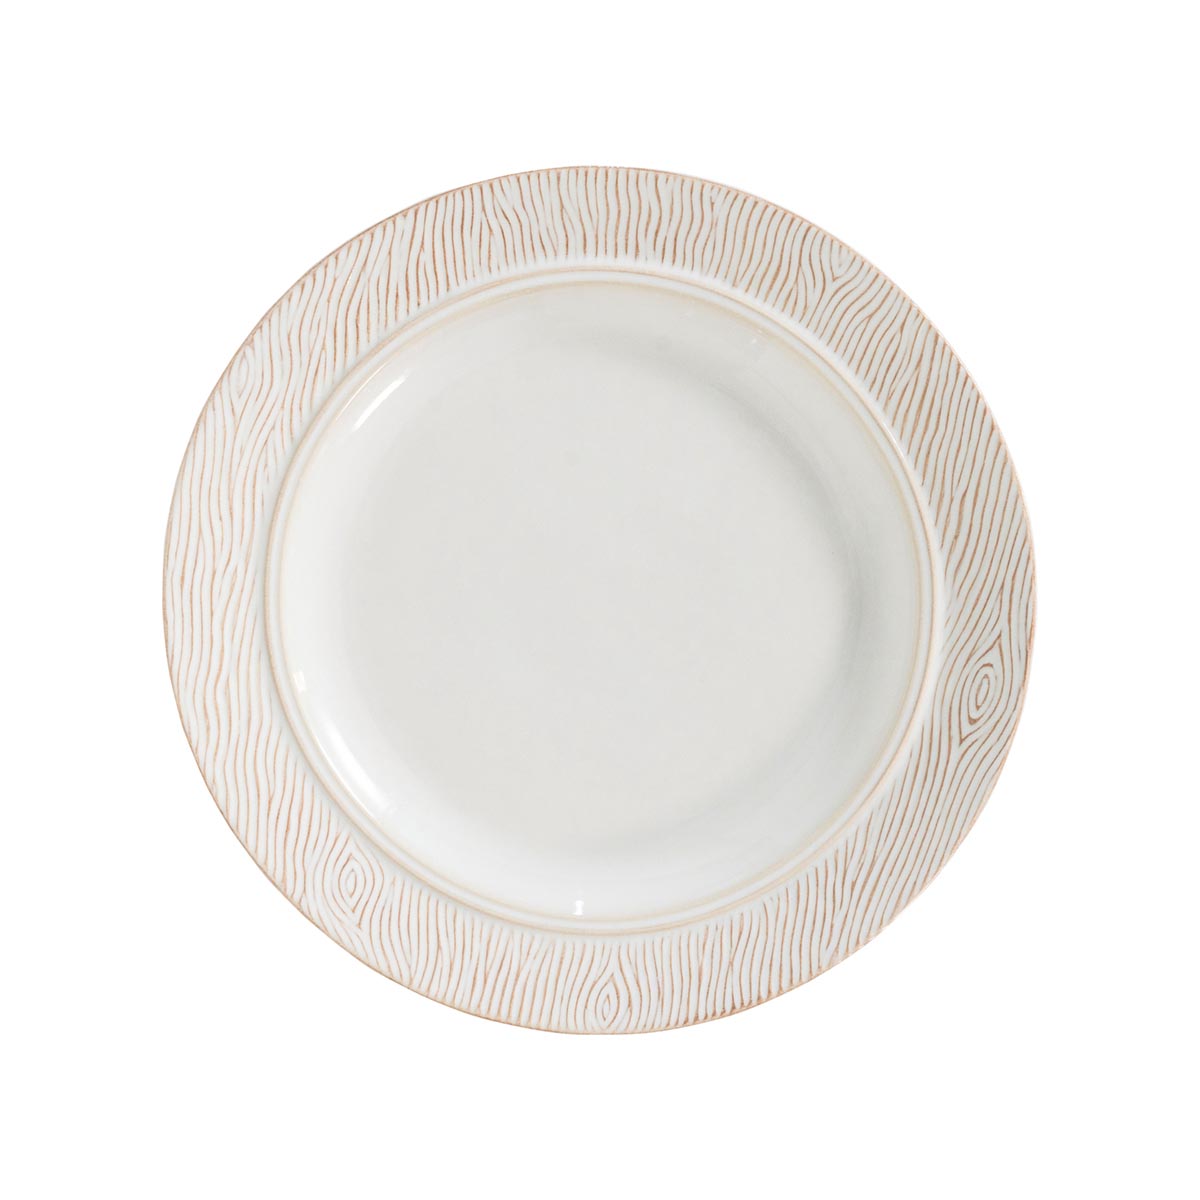 Inspired by the oldest grove of oak trees in England’s Blenheim Park, this woodgrain textured collection is rendered in a fresh and peaceful palette of creams and warm browns, with our signature whitewash glaze and a patina to highlight the beautifully rich motif. Equally idyllic and chic, this versatile plate was designed to complement everything -- from a slice of birthday cake to tapas or toast.